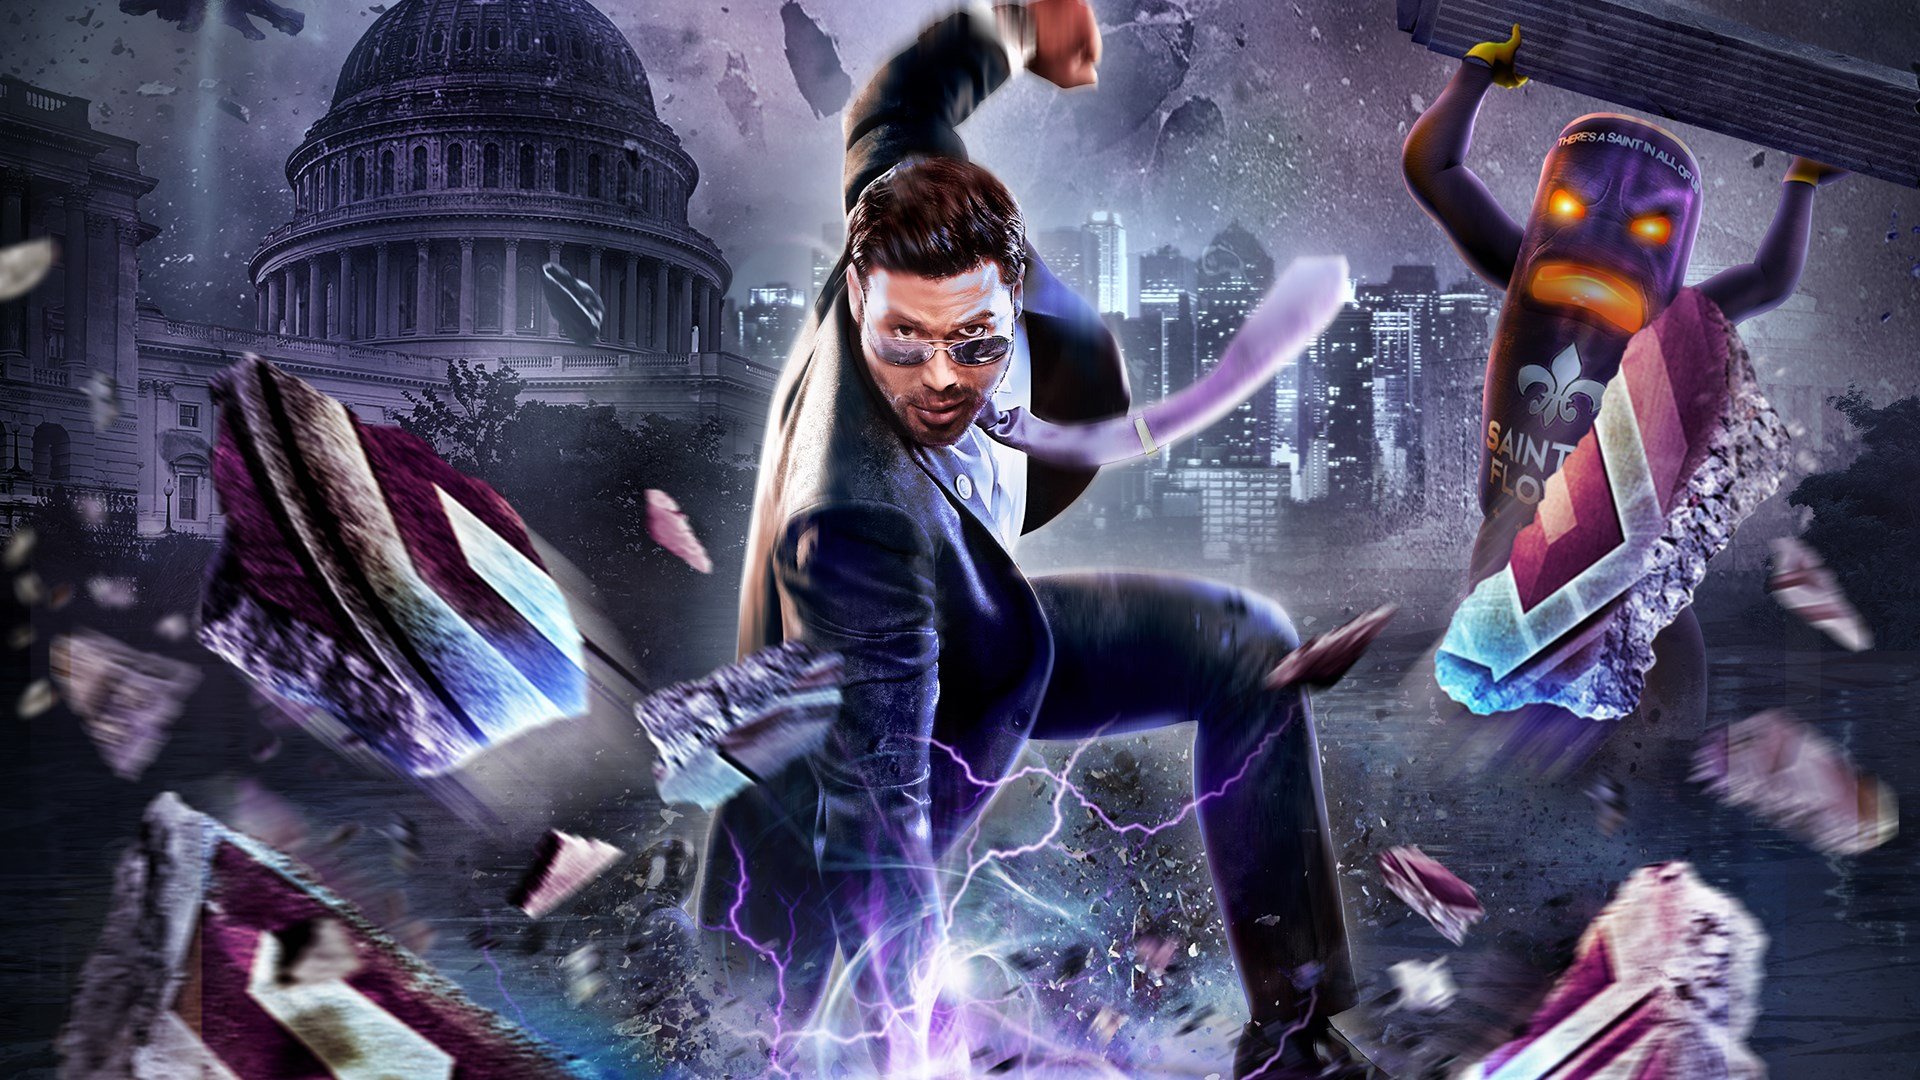 Saints Row IV: Re-Elected cover image